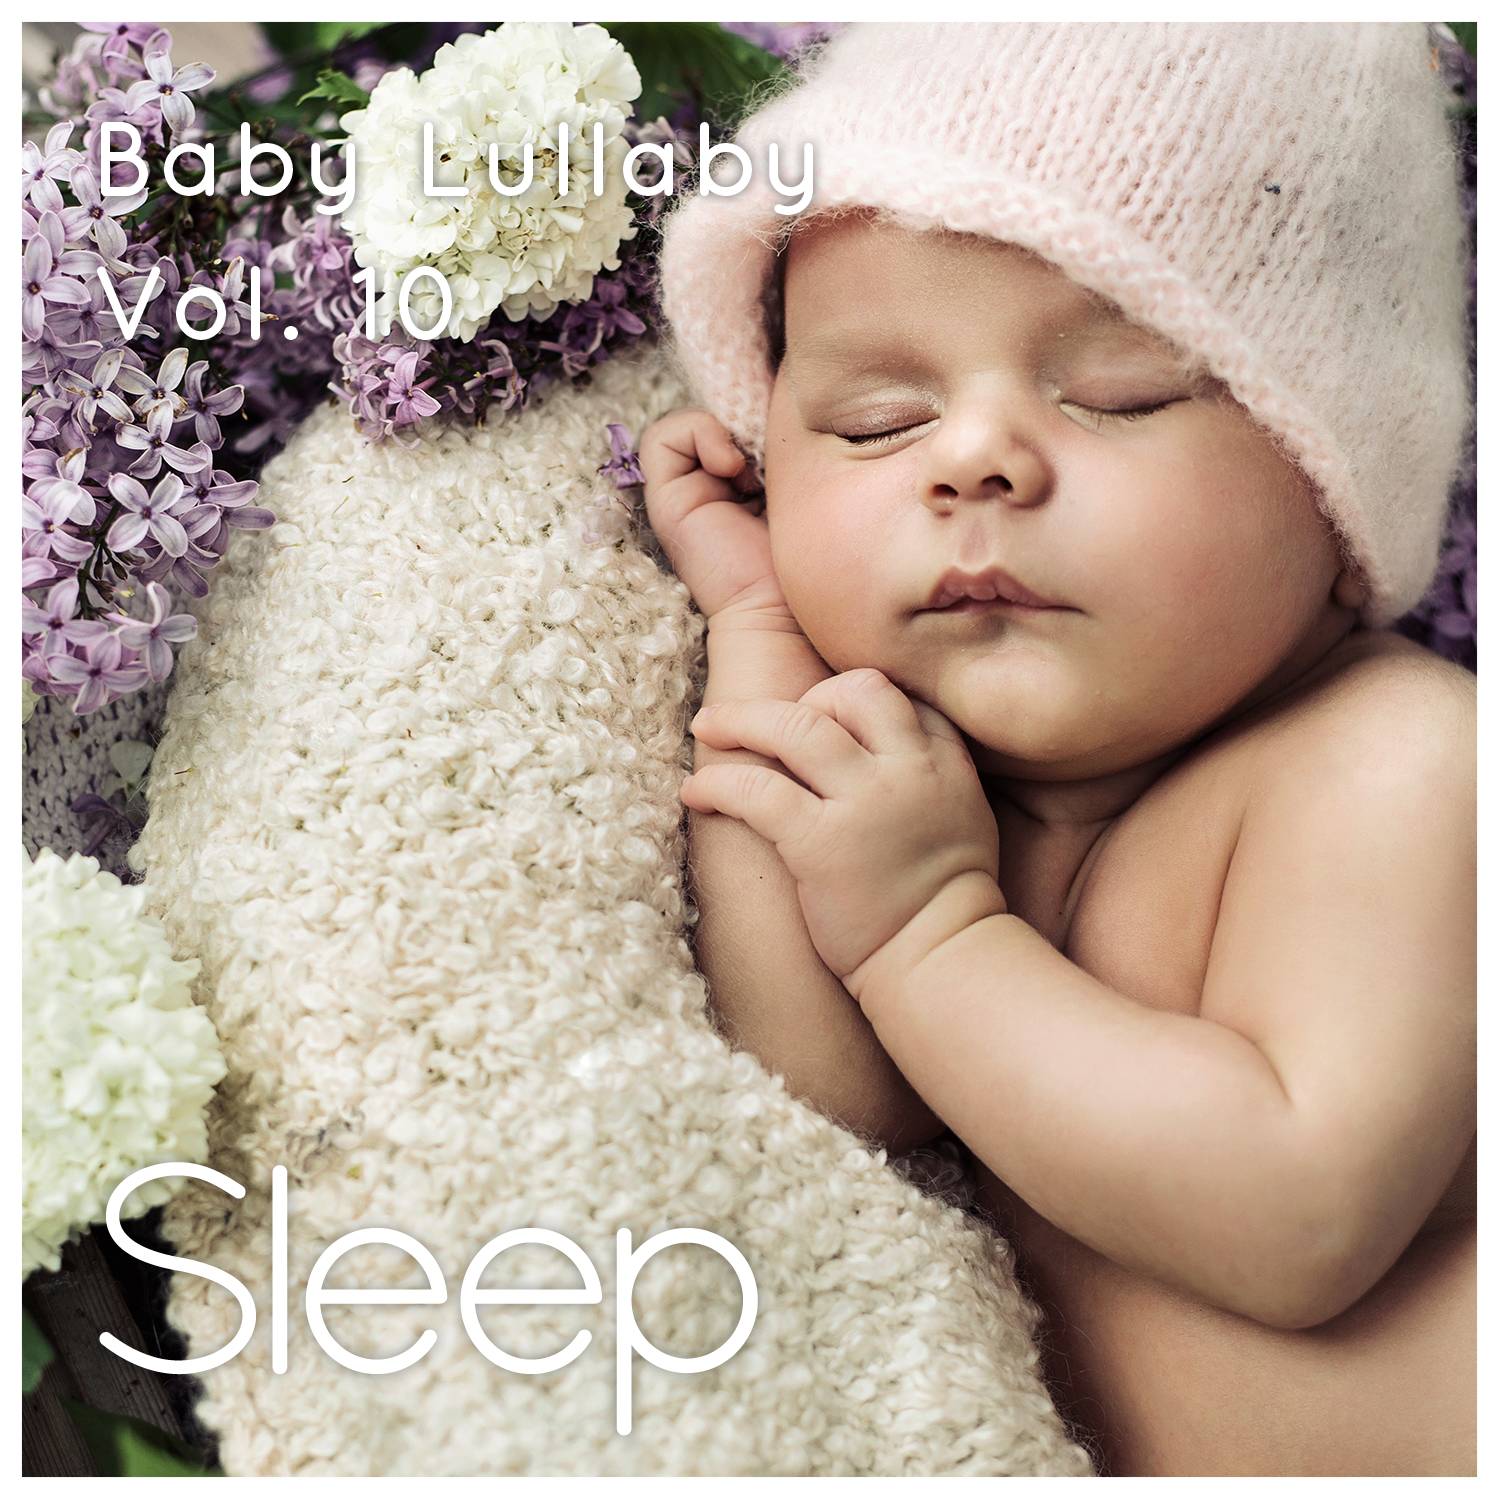 Baby Sleep Ambient Lullaby, Pt. 46